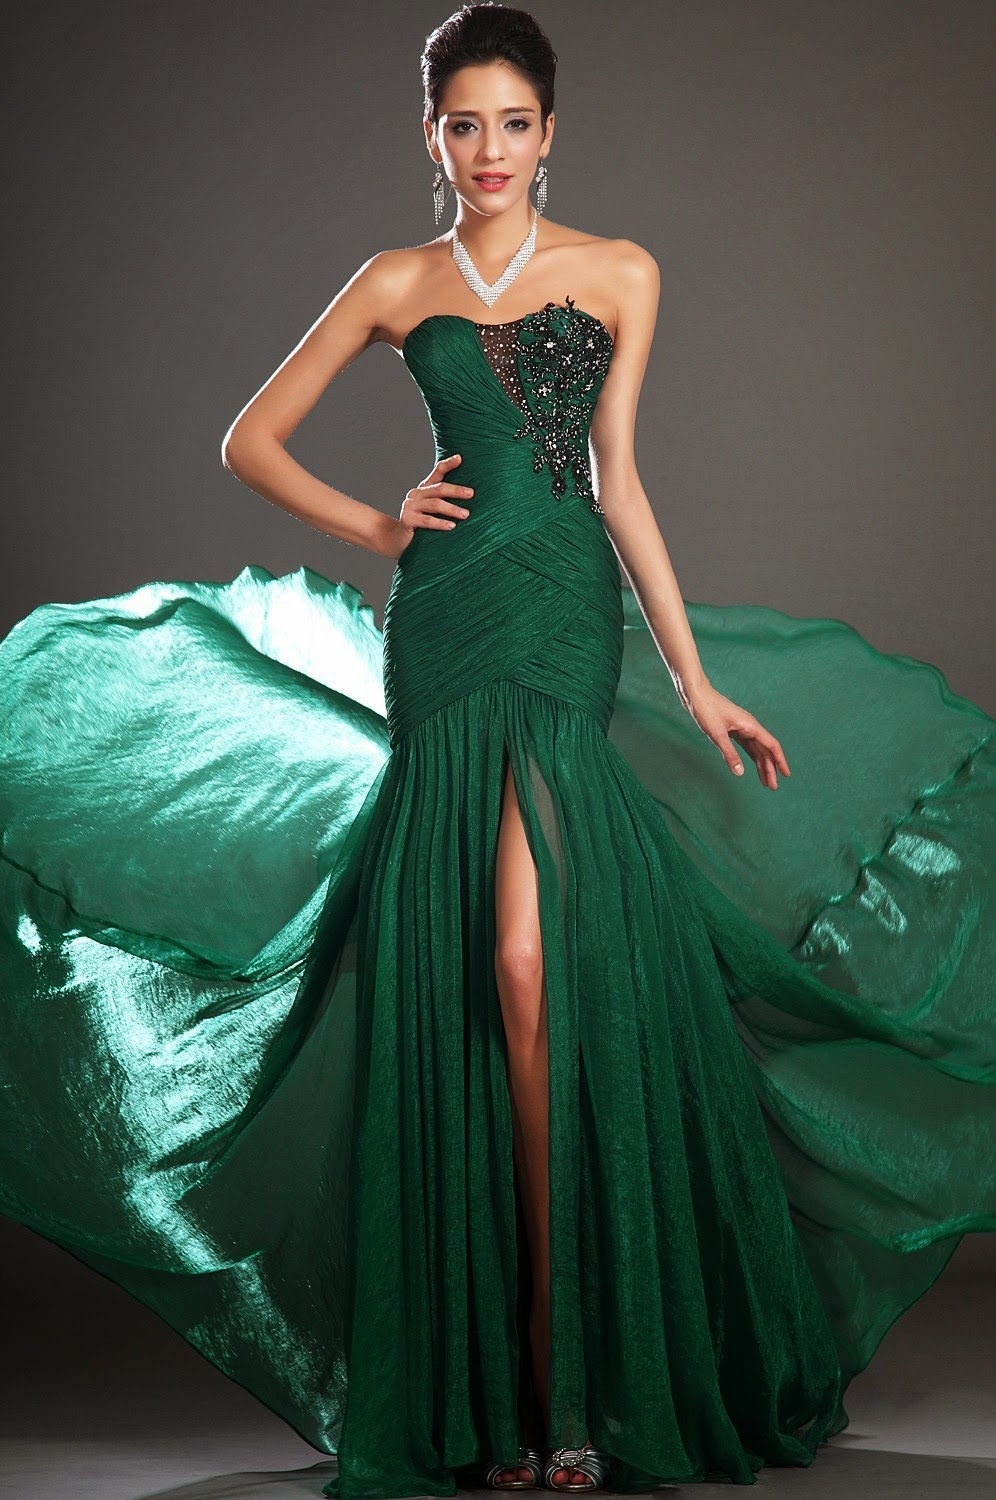 Evolving Fashion Trends! : Gowns